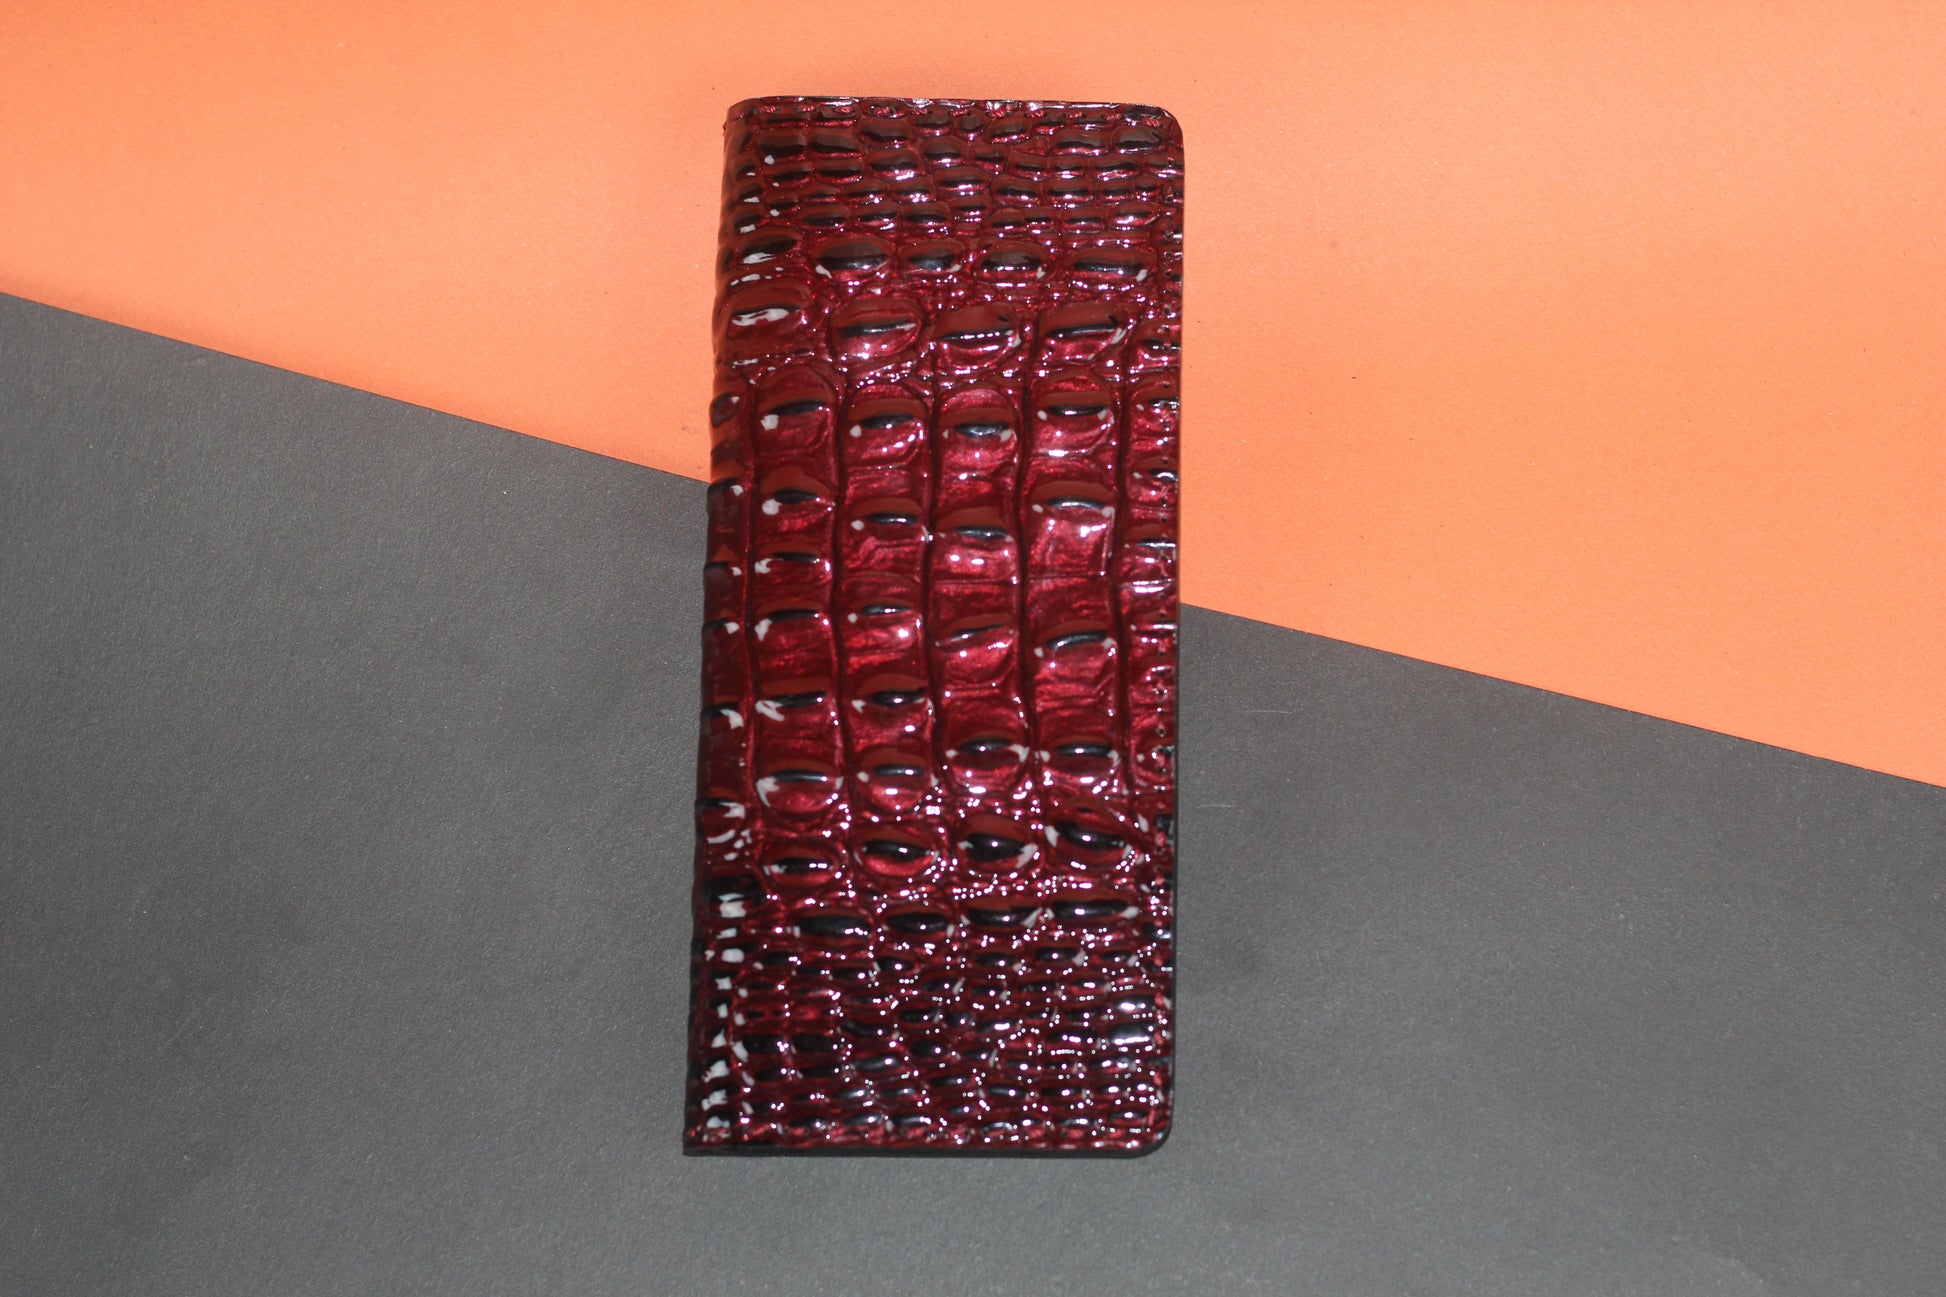 Unisex Genuine Leather Wallet With High-Glossed Maroon Crocodile Textured Finish | Exotic Bifold Long Wallet